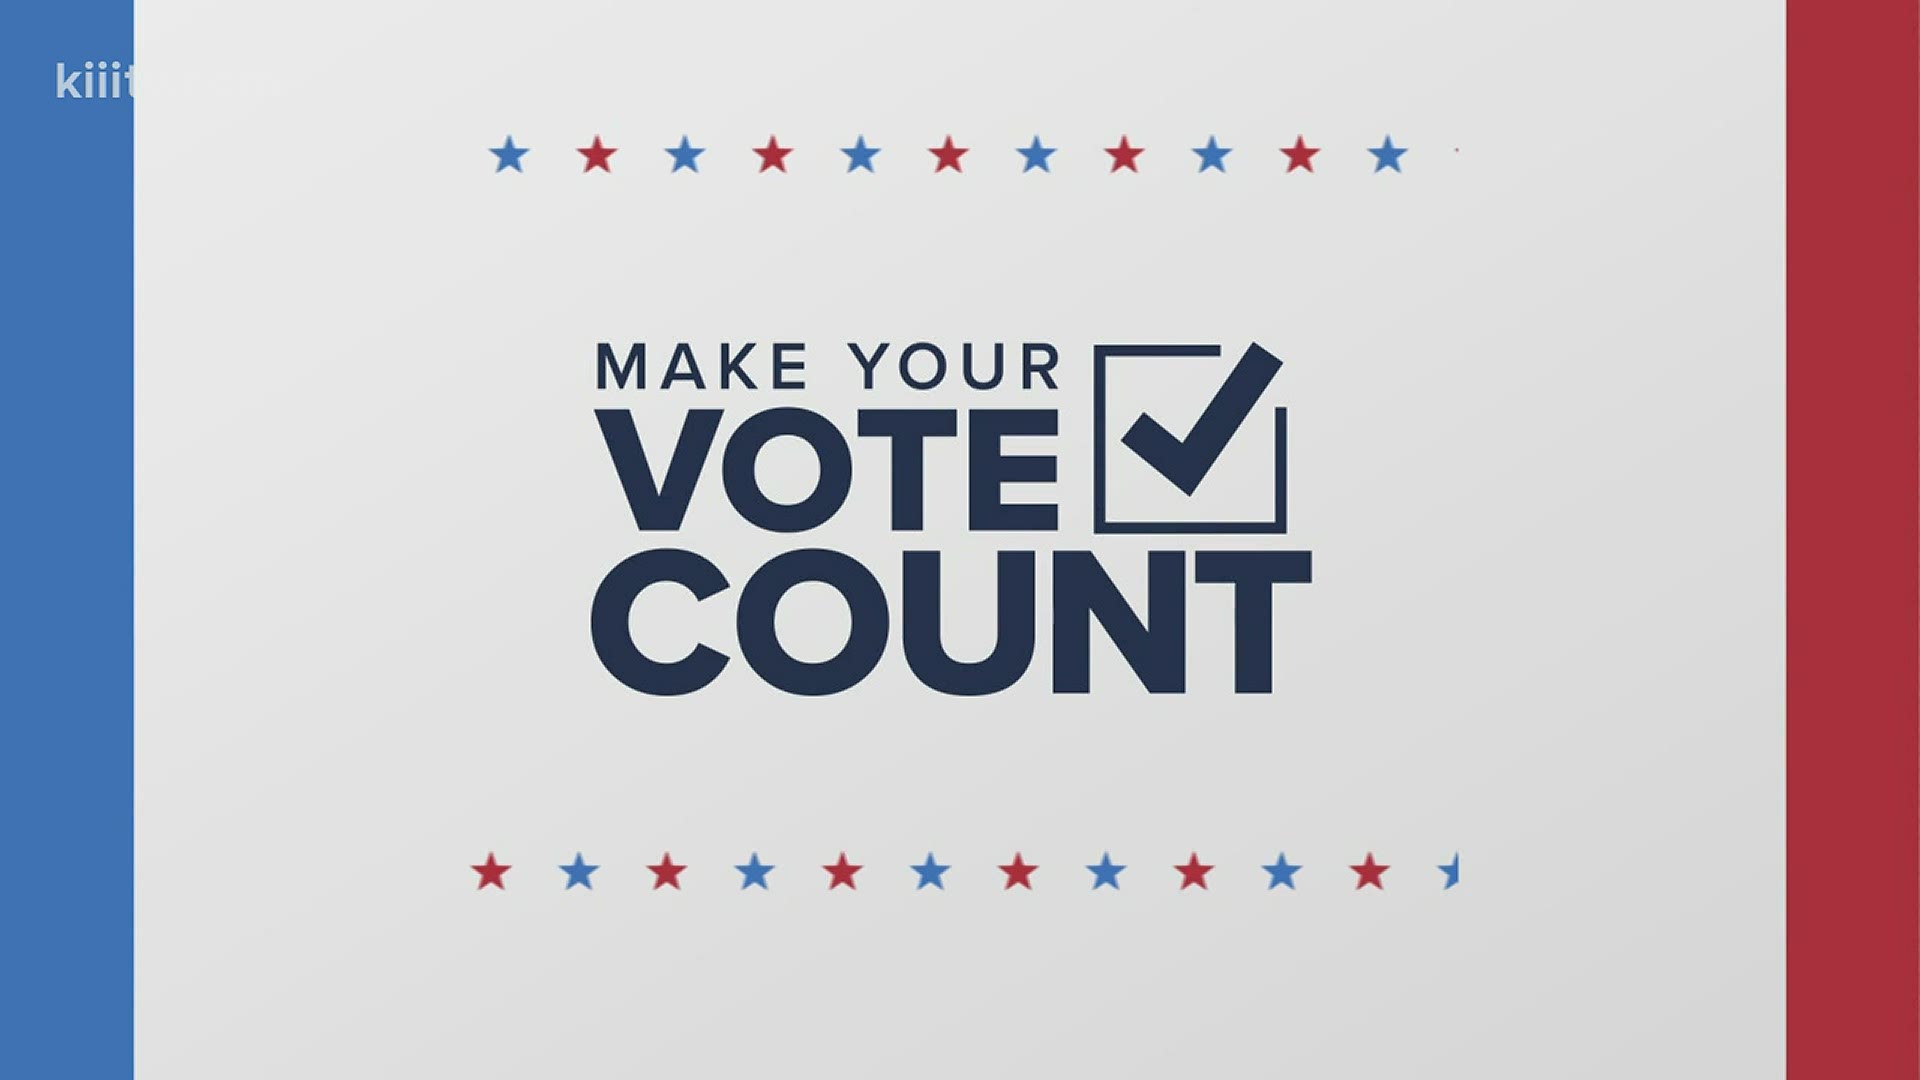 You will need your voter ID number or your name and the county in which you voted.